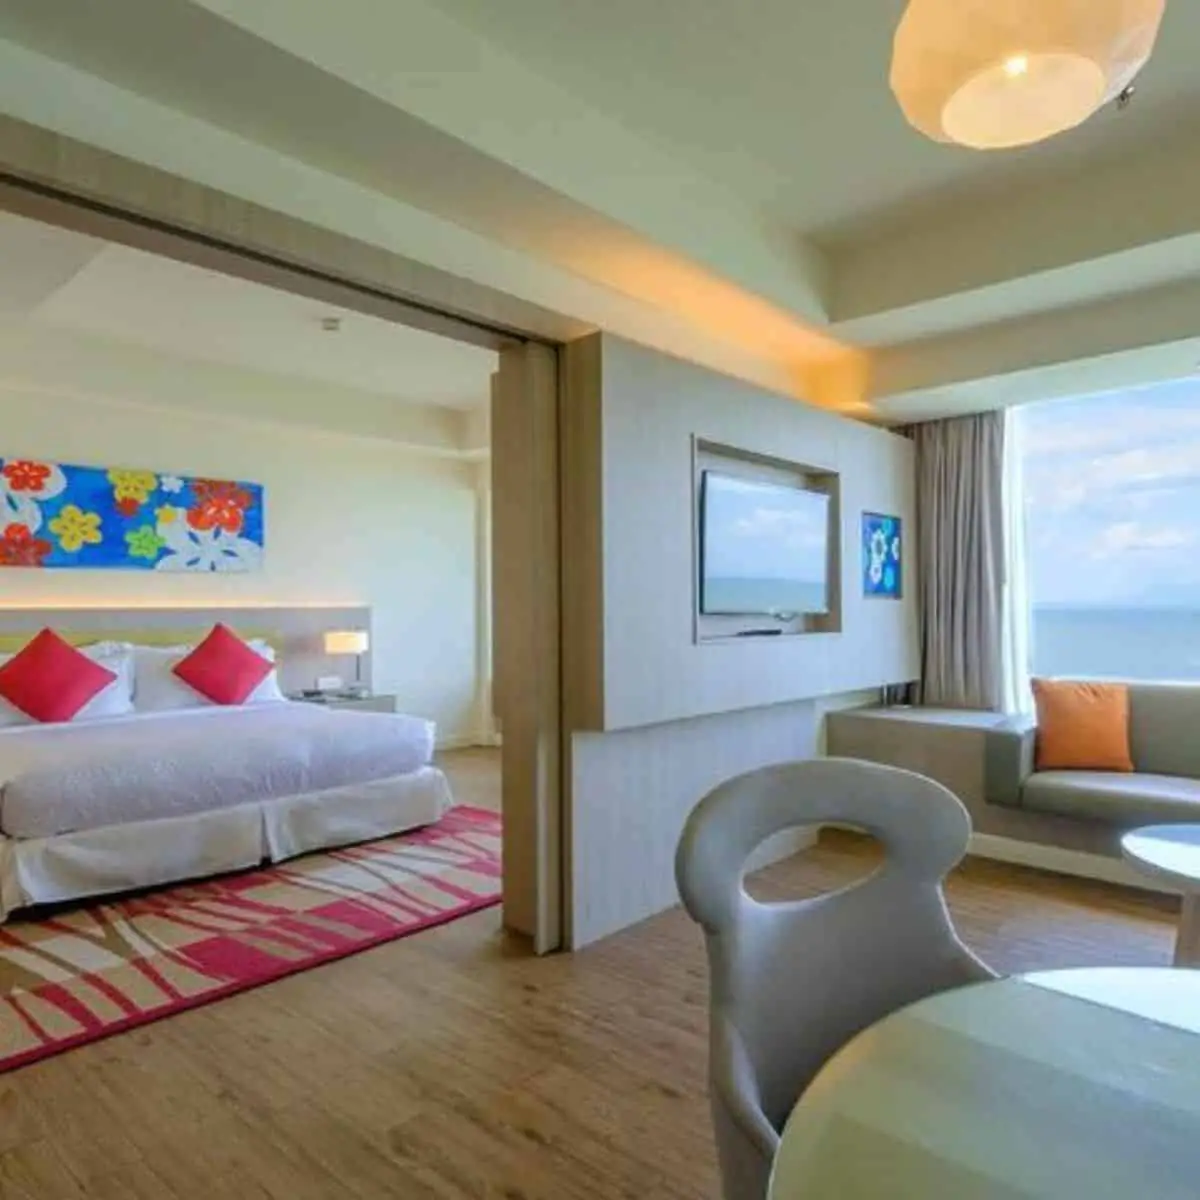 Cool and calming setting of family suite room with beach view in the windows